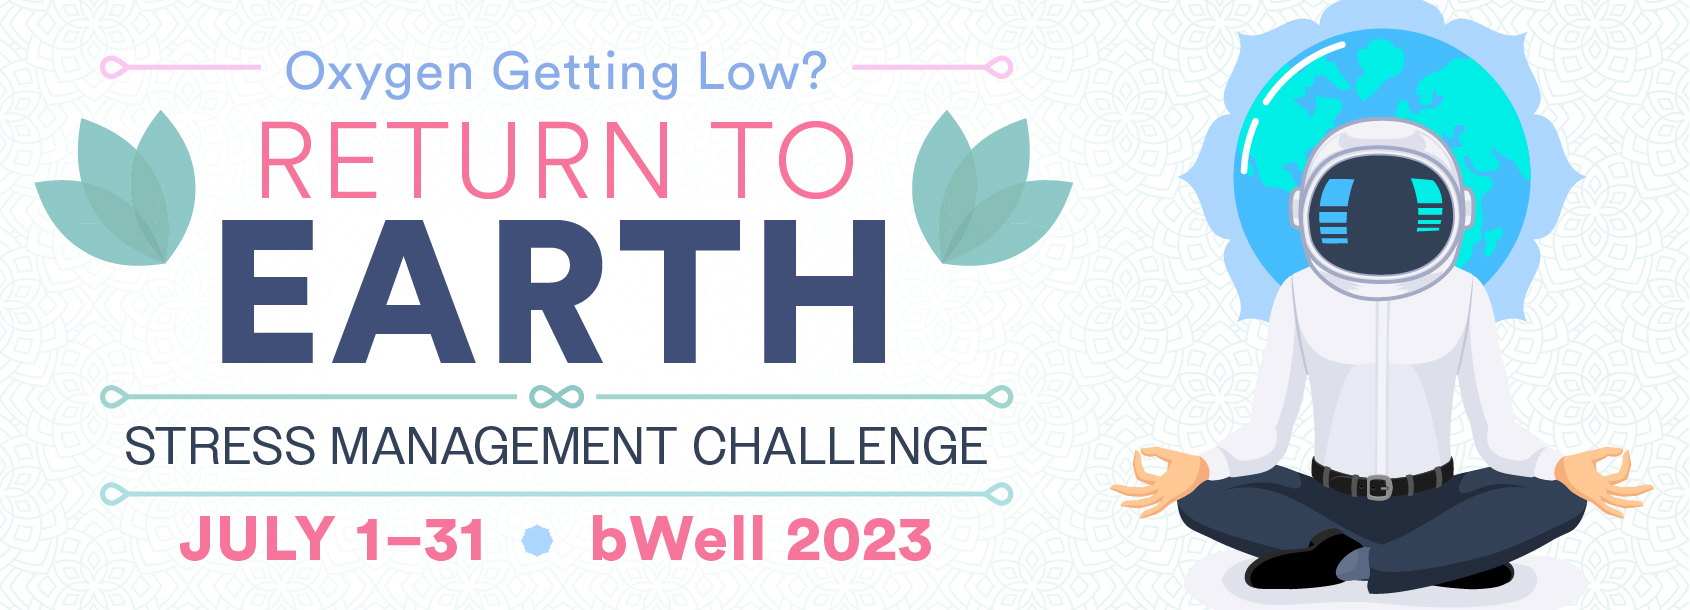 Return to Earth - Stress Management Challenge July 1 - 31